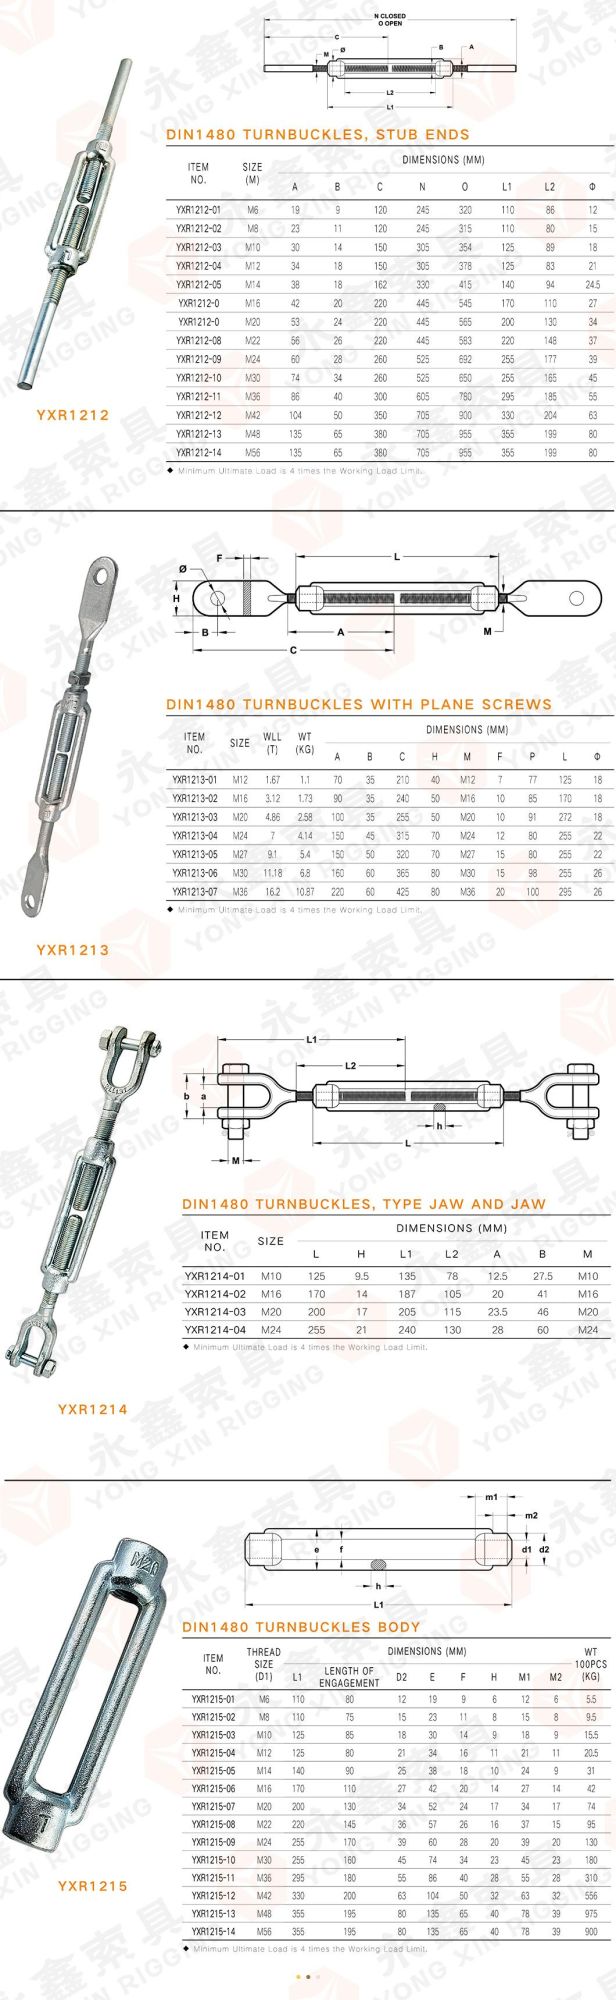 High Polished AISI304 316 Stainless Steel Double Hook DIN1480 Open Body Turnbuckle